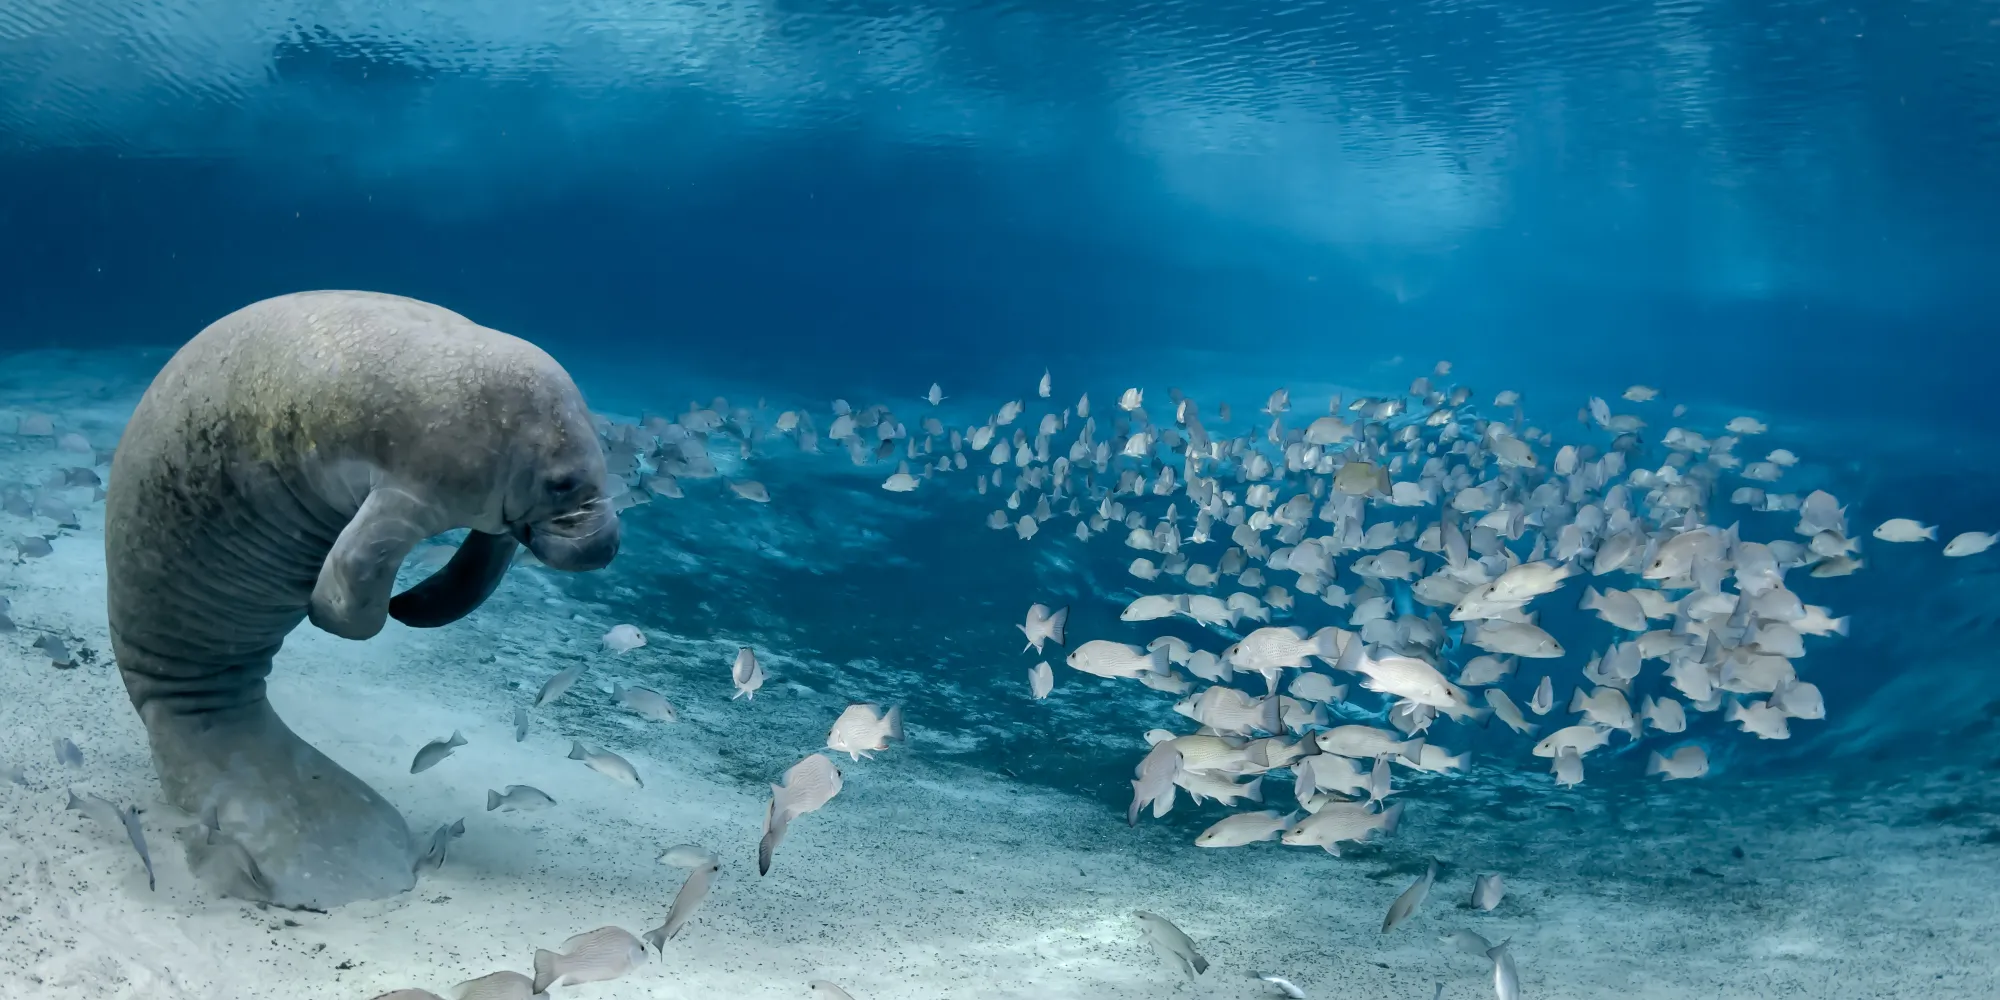 A manatee with fish